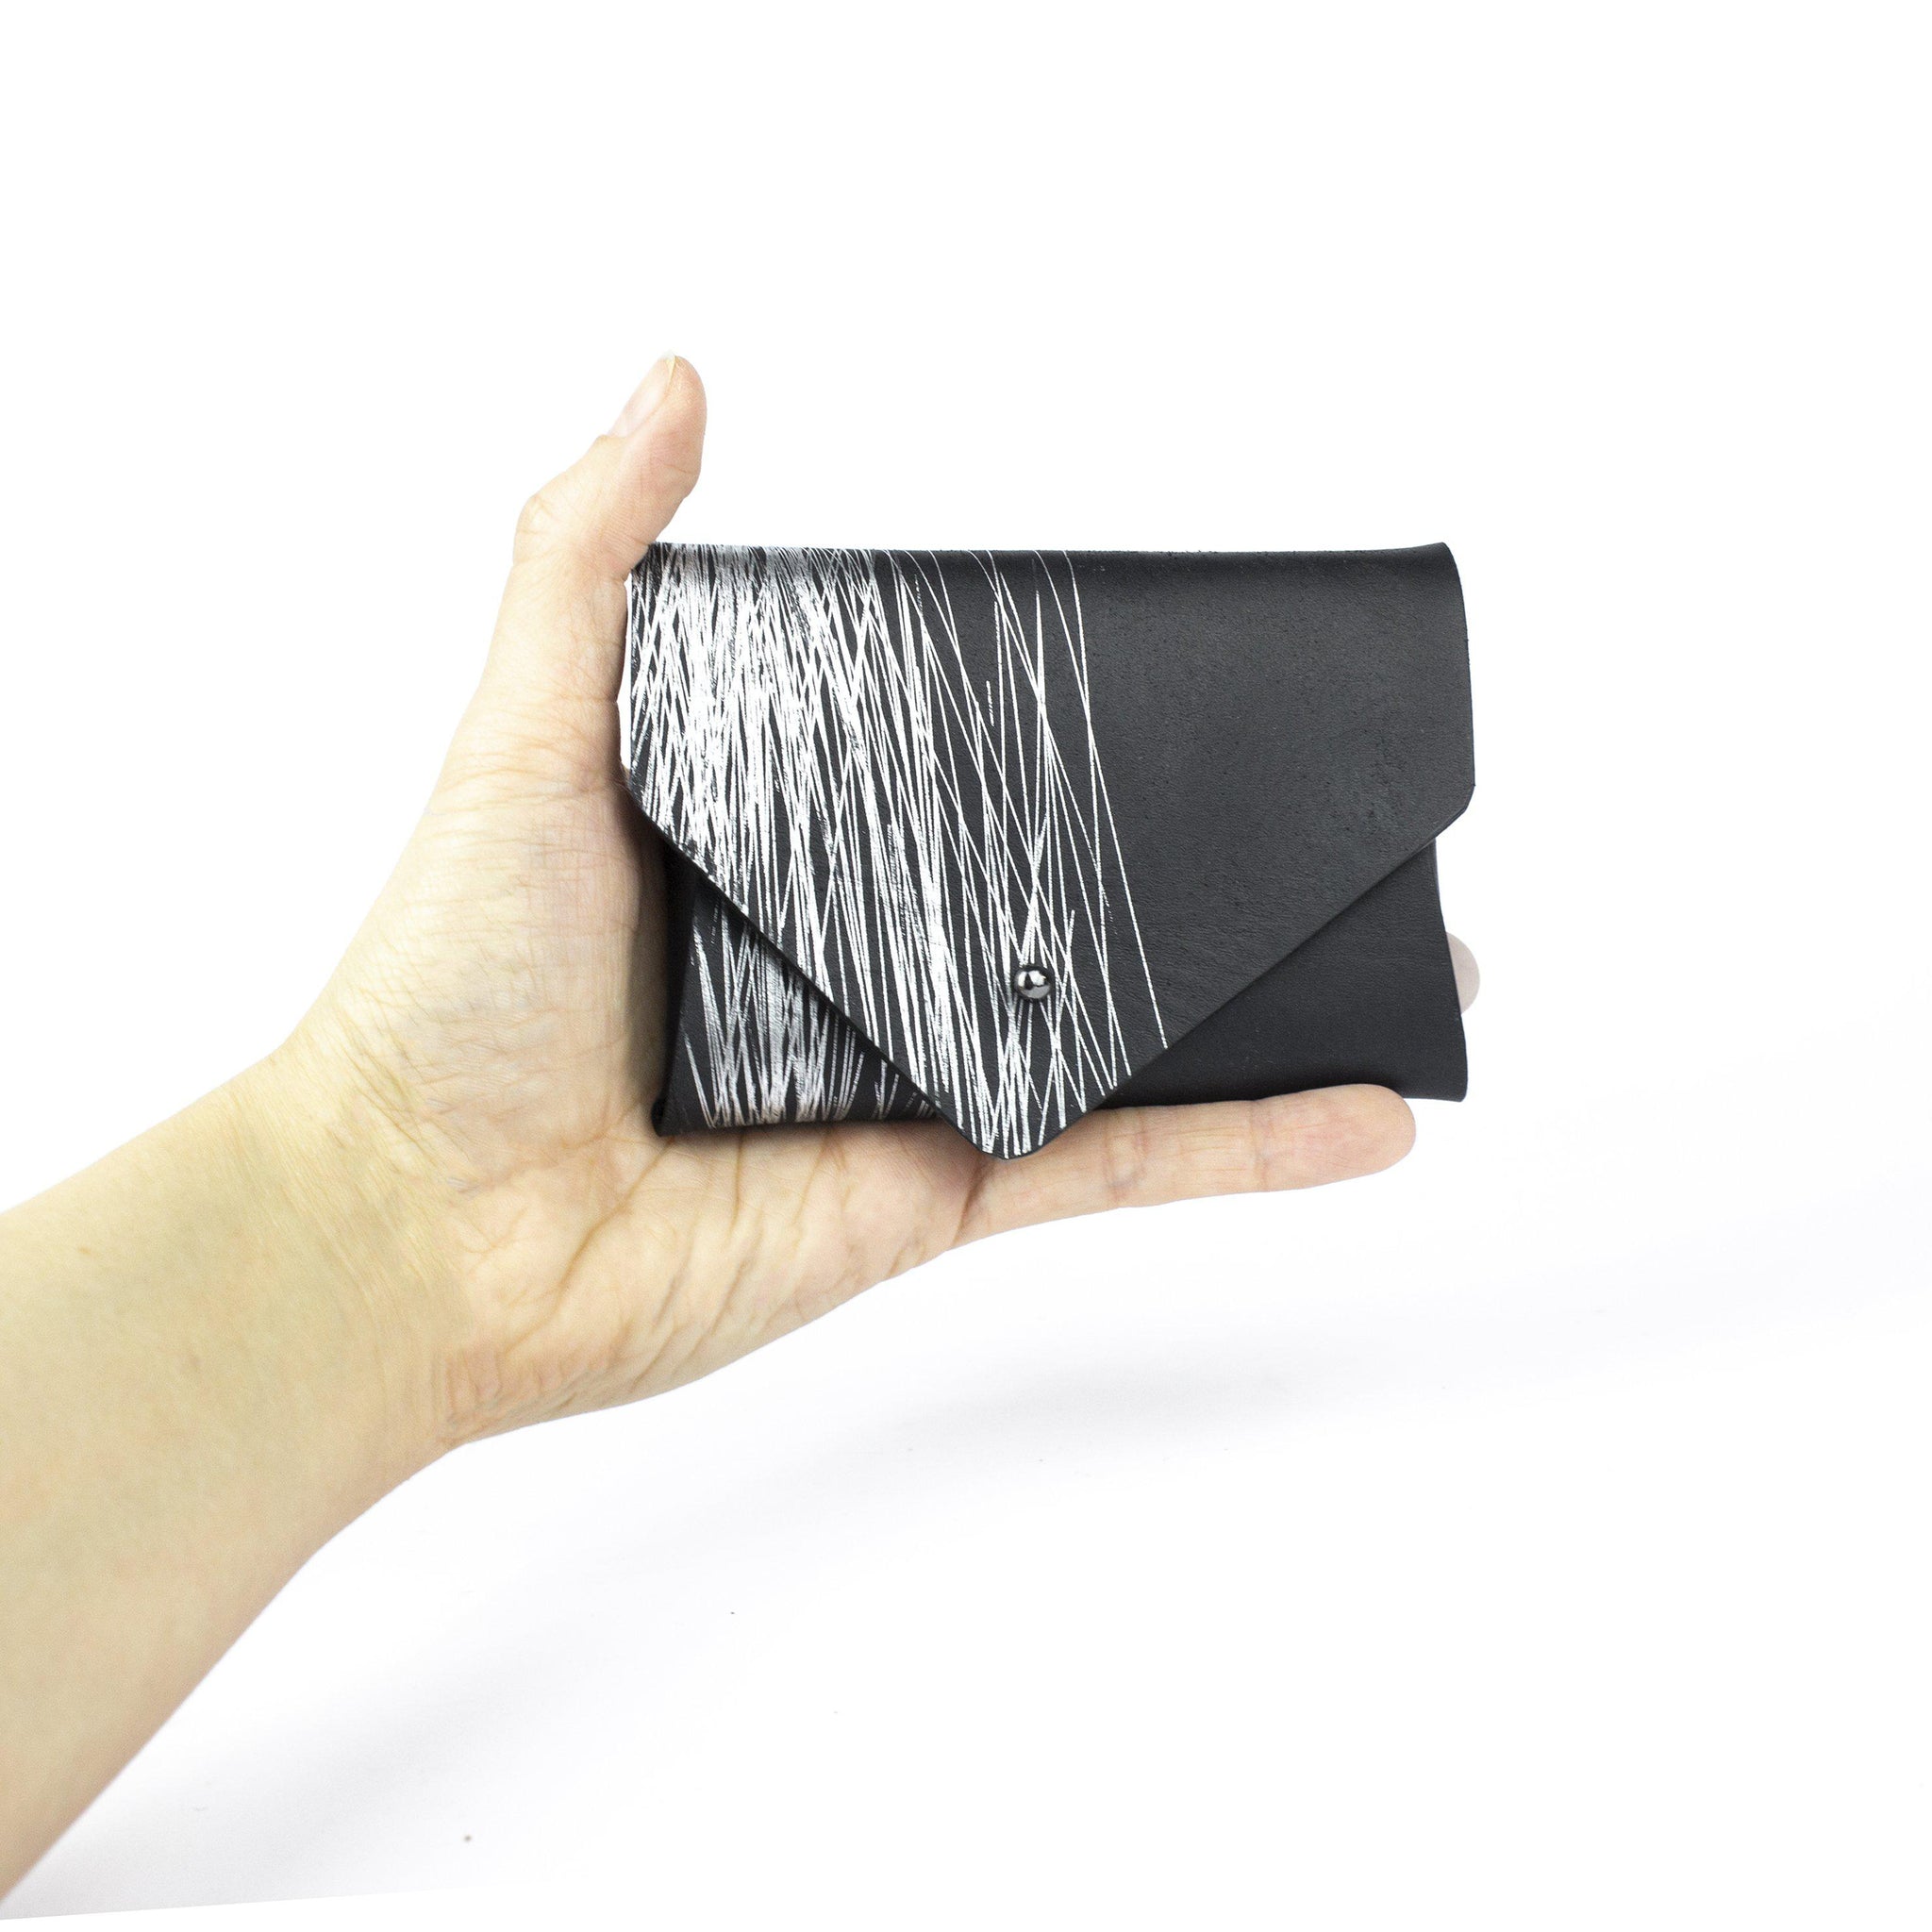 Card holder / coin purse black and silver-Bags_And_Purses, black and silver, card_case, coin, coin purse, colourful, design, designer, geometric, hand_painted, minimal, minimalist, monochrome, pouch, purse, recycled, silver, simple, splattered, wallet-Mimikri